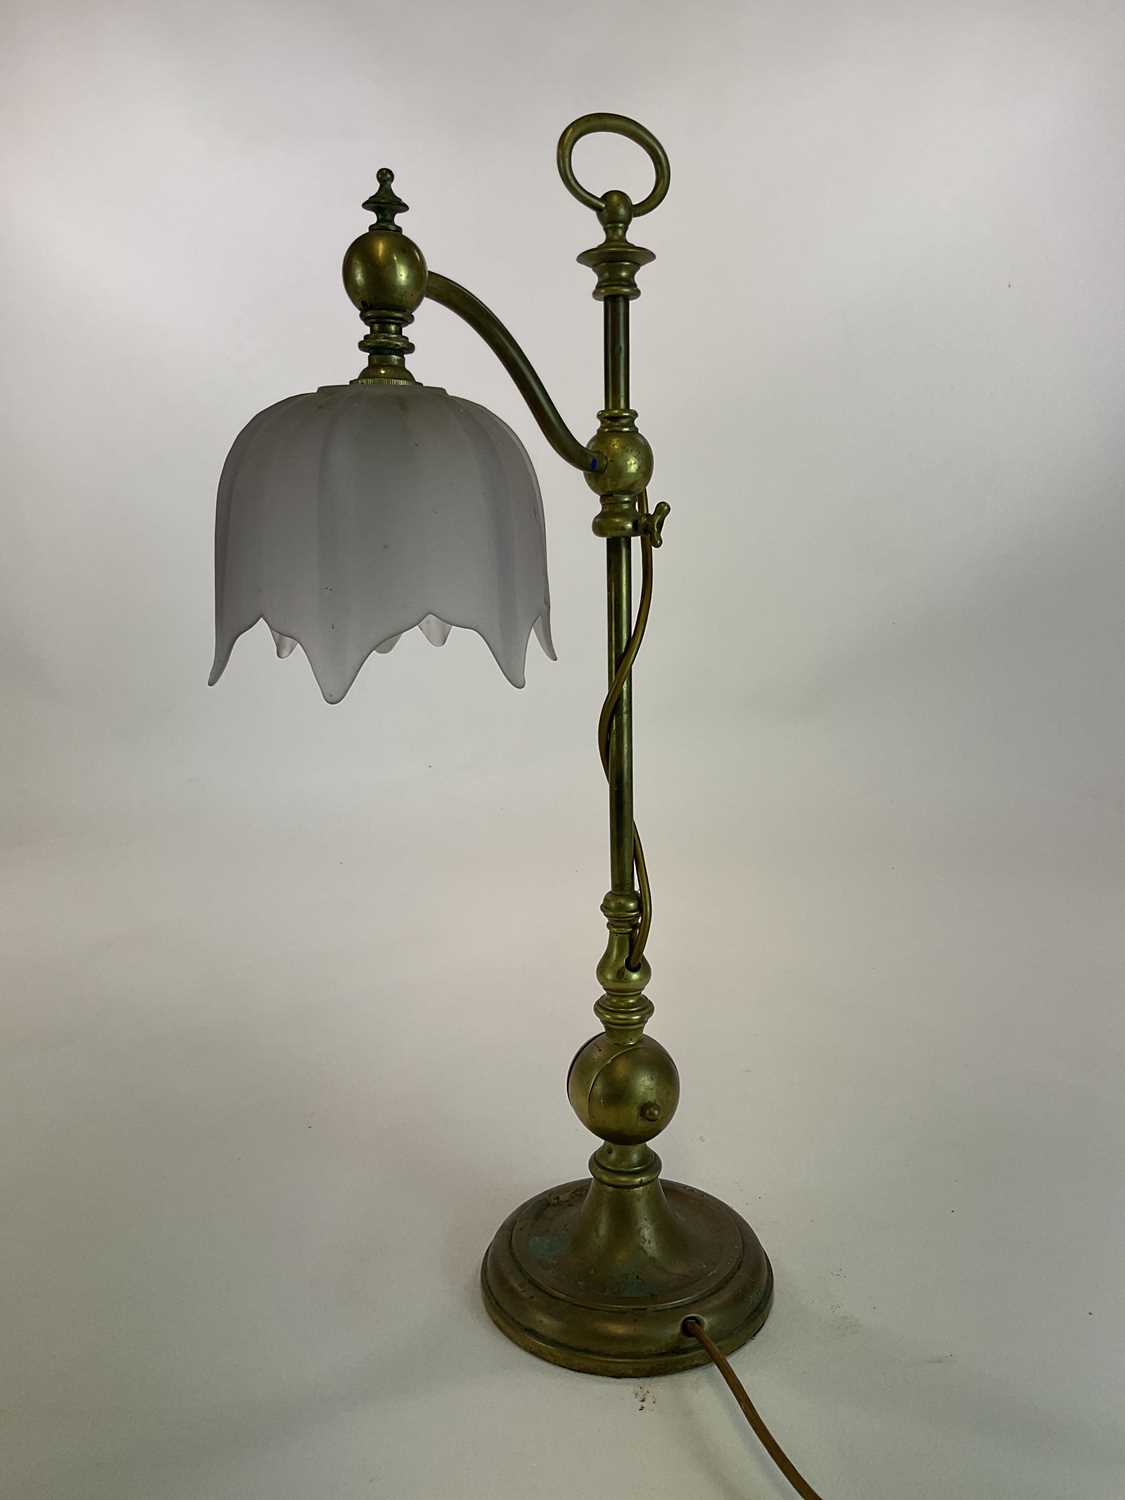 Two decorative brass table lamps, one adjustable with a frosted glass shade and the other with a - Image 3 of 3